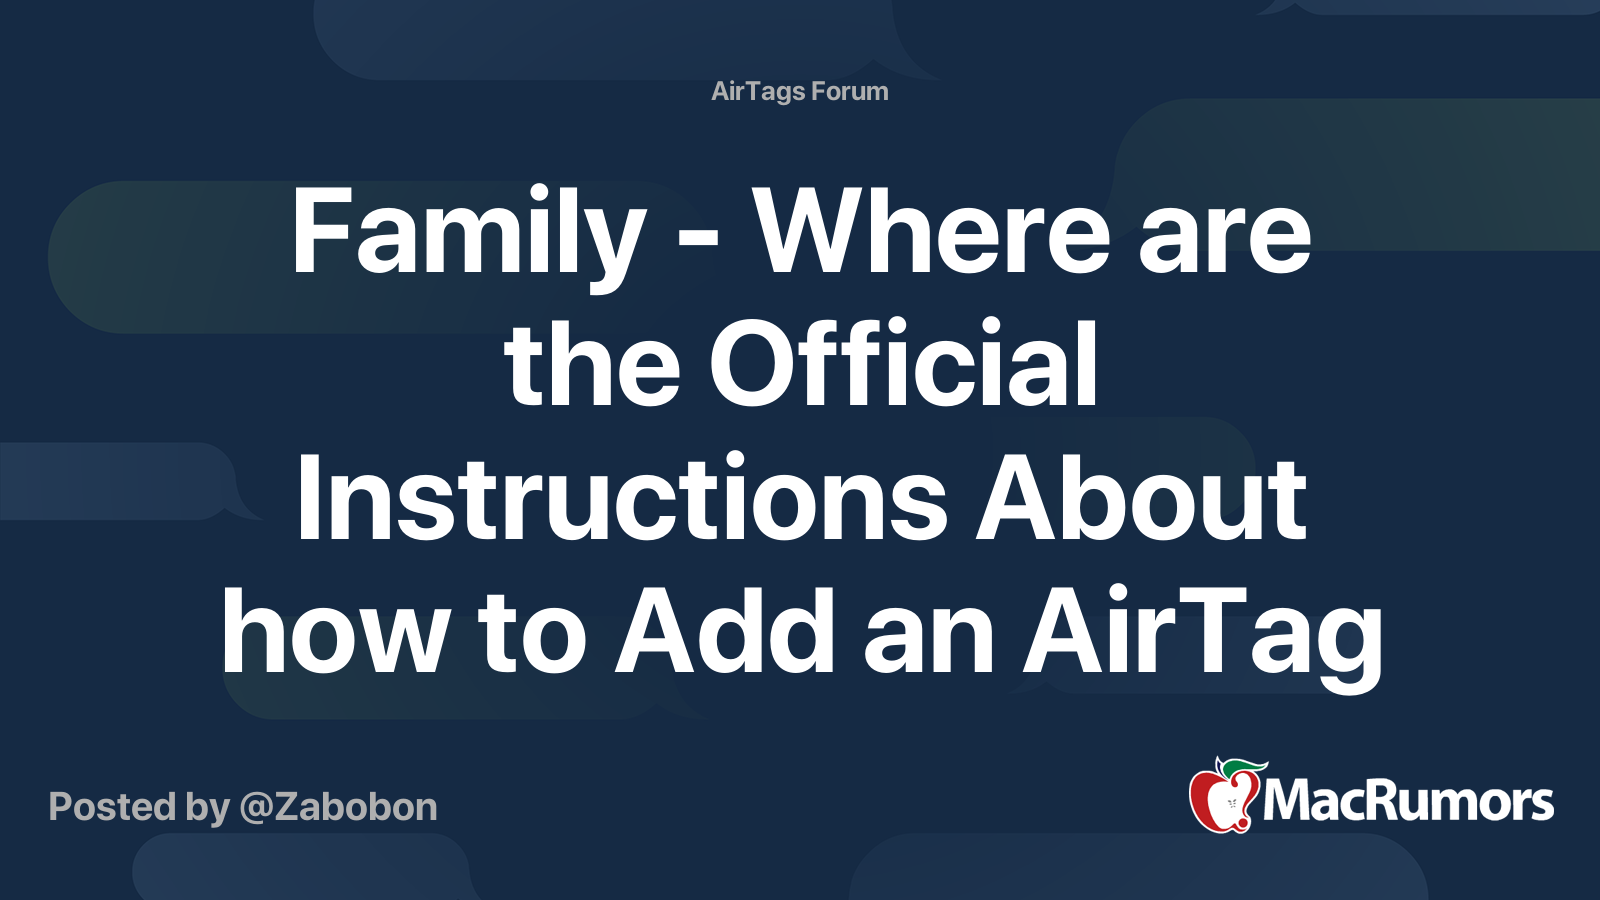 Family Where are the Official Instructions About how to Add an AirTag